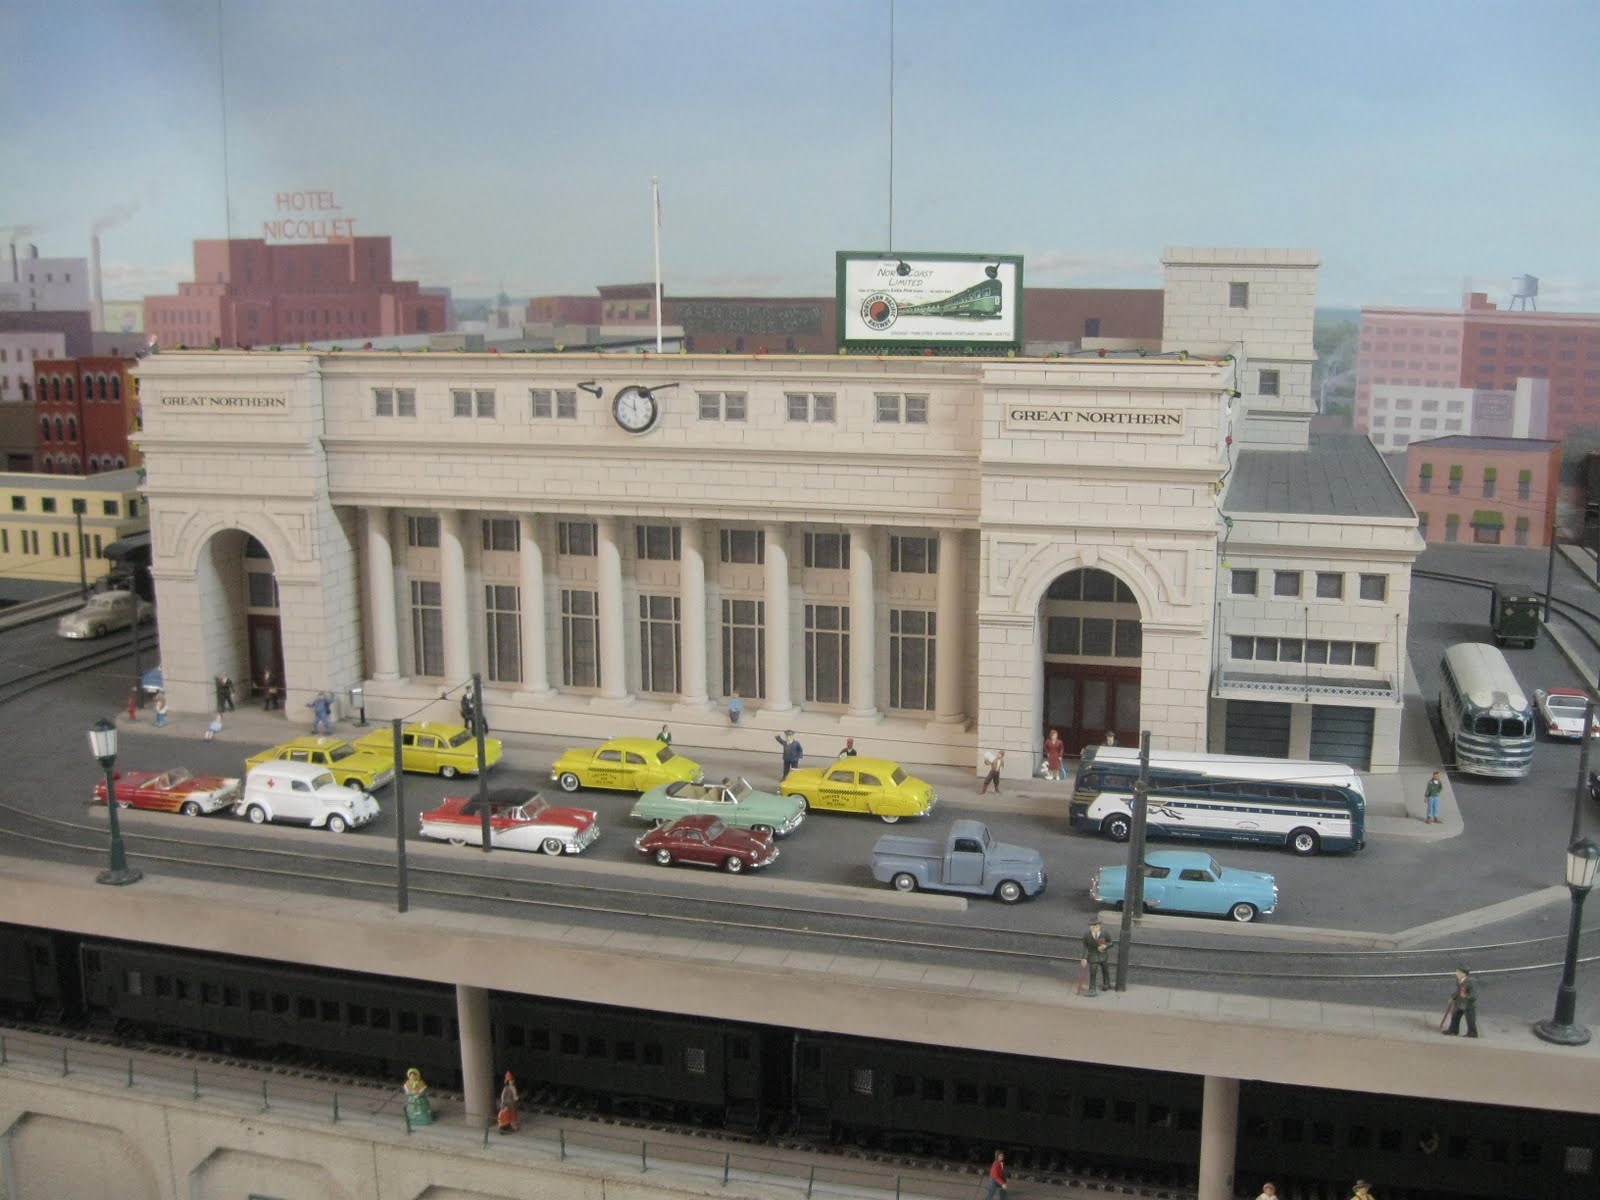  : Twin City Model Railroad Museum: A Must-See In Minneapolis-St. Paul